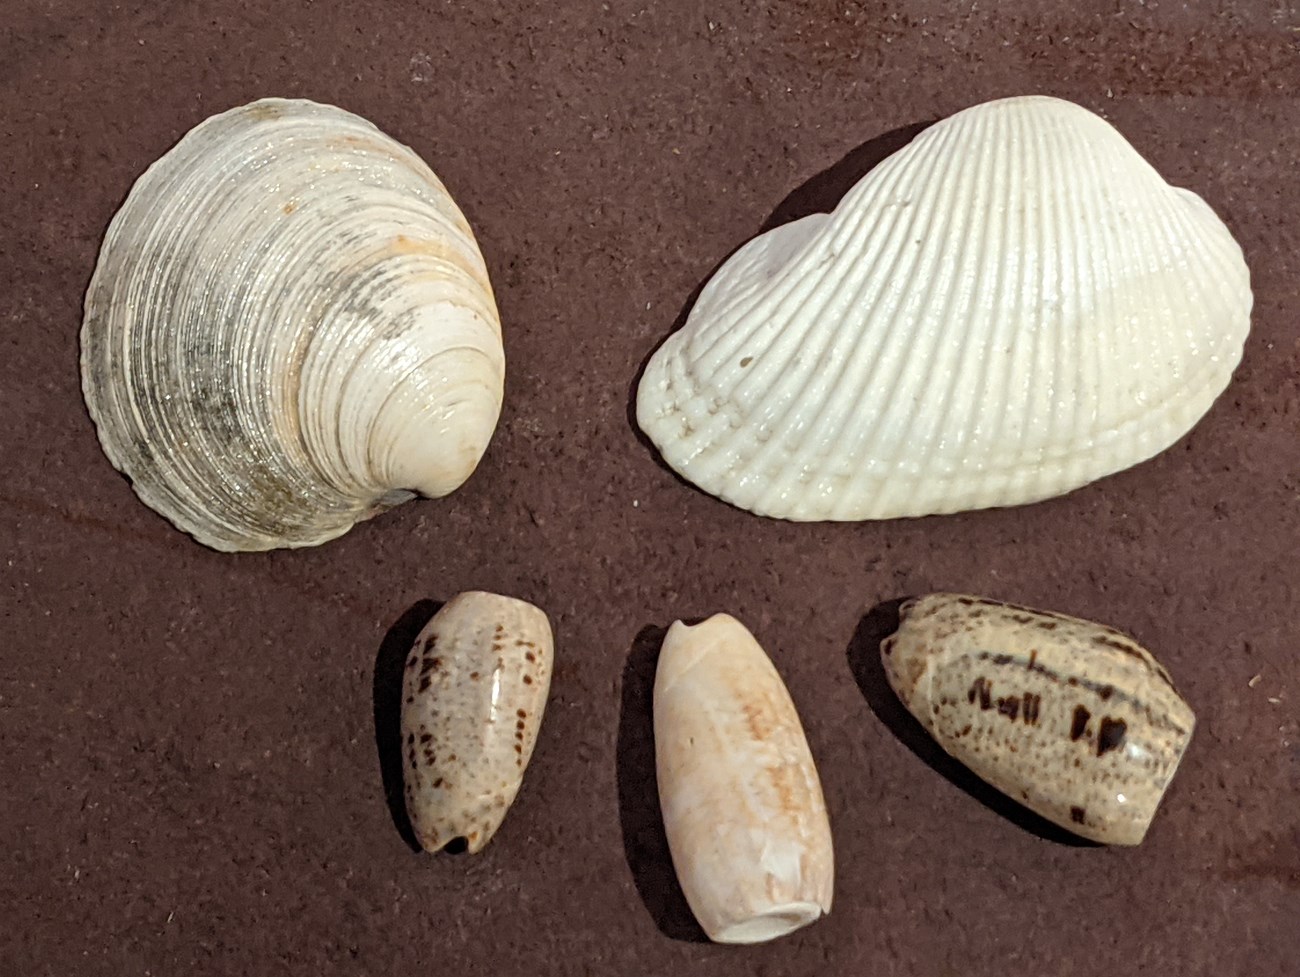 A variety of shells that the ancestral Pueblo people would have traded for.